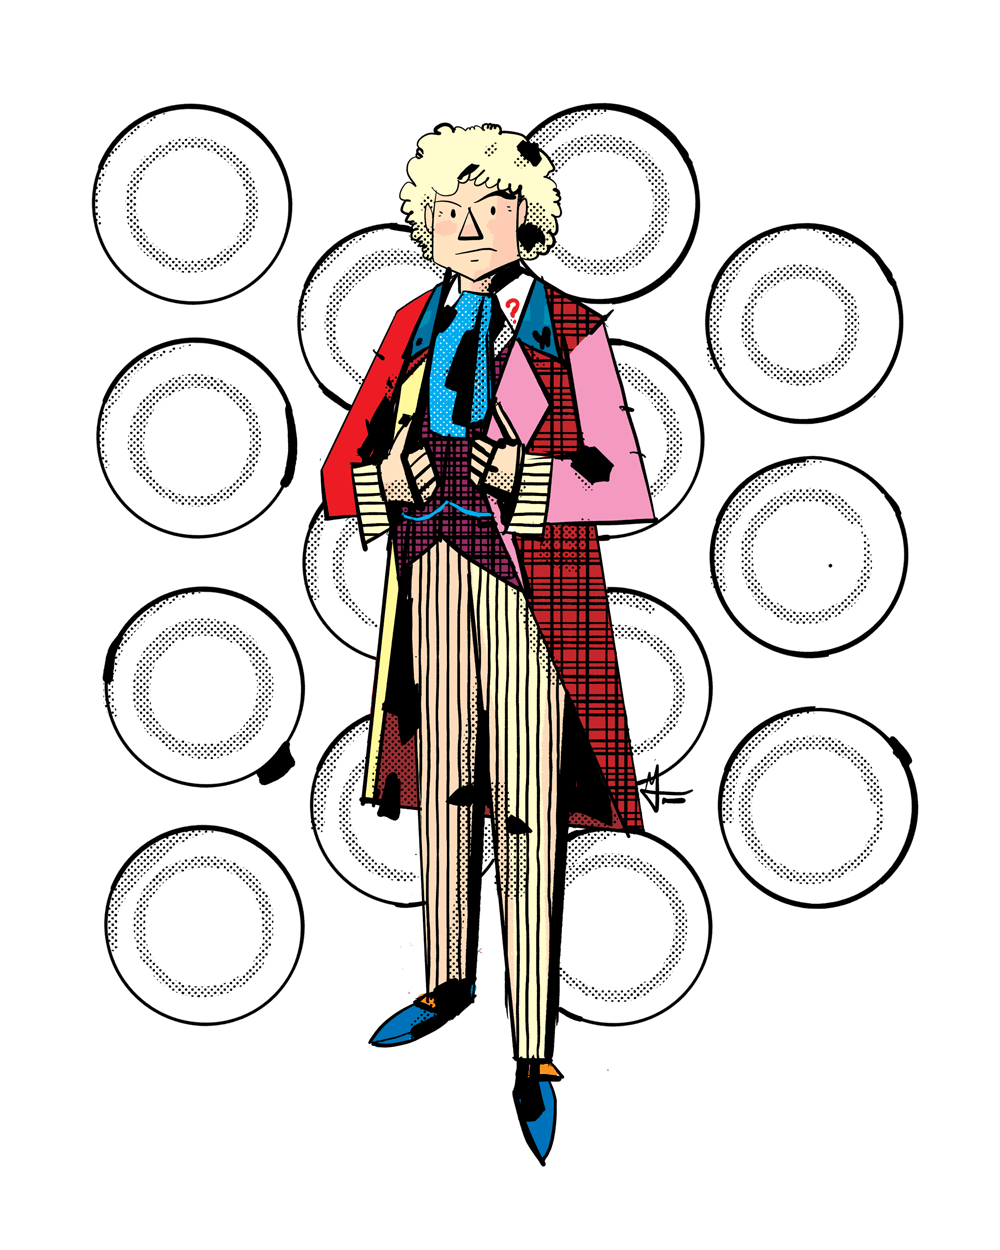 Colin Baker's Sixth Doctor is wearing a multi-colored patchwork overcoat, a purple vest, yellow striped pants, and a grimace on his face. He is holding his lapels.